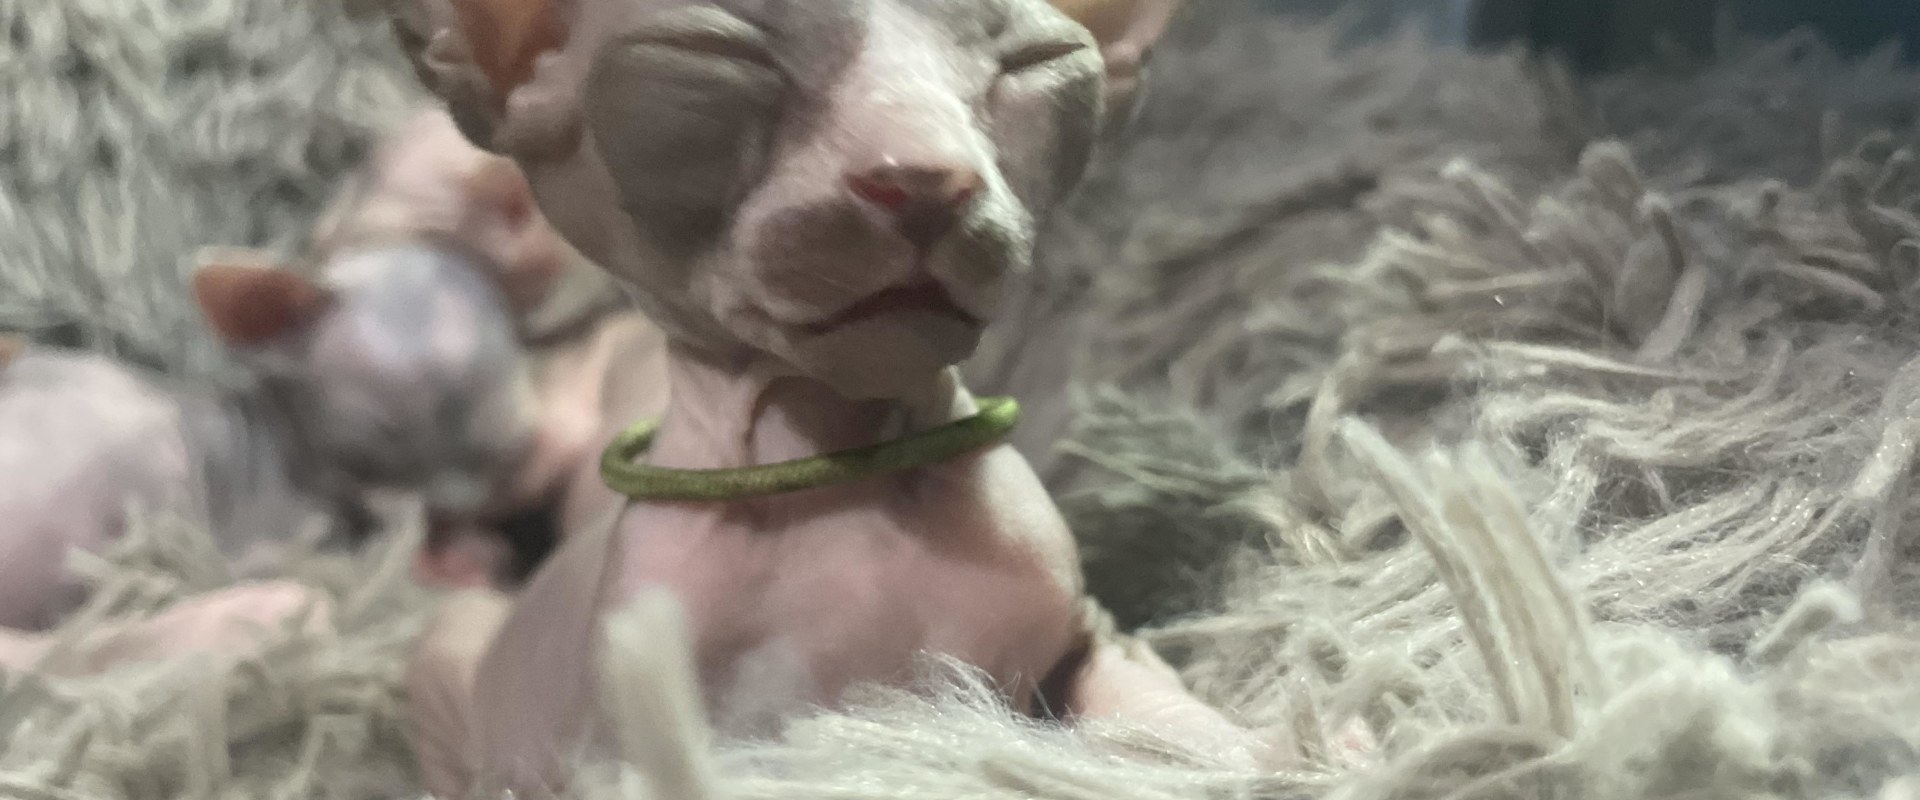 What type of food should i give to a hairless or sphynx breed of cats?